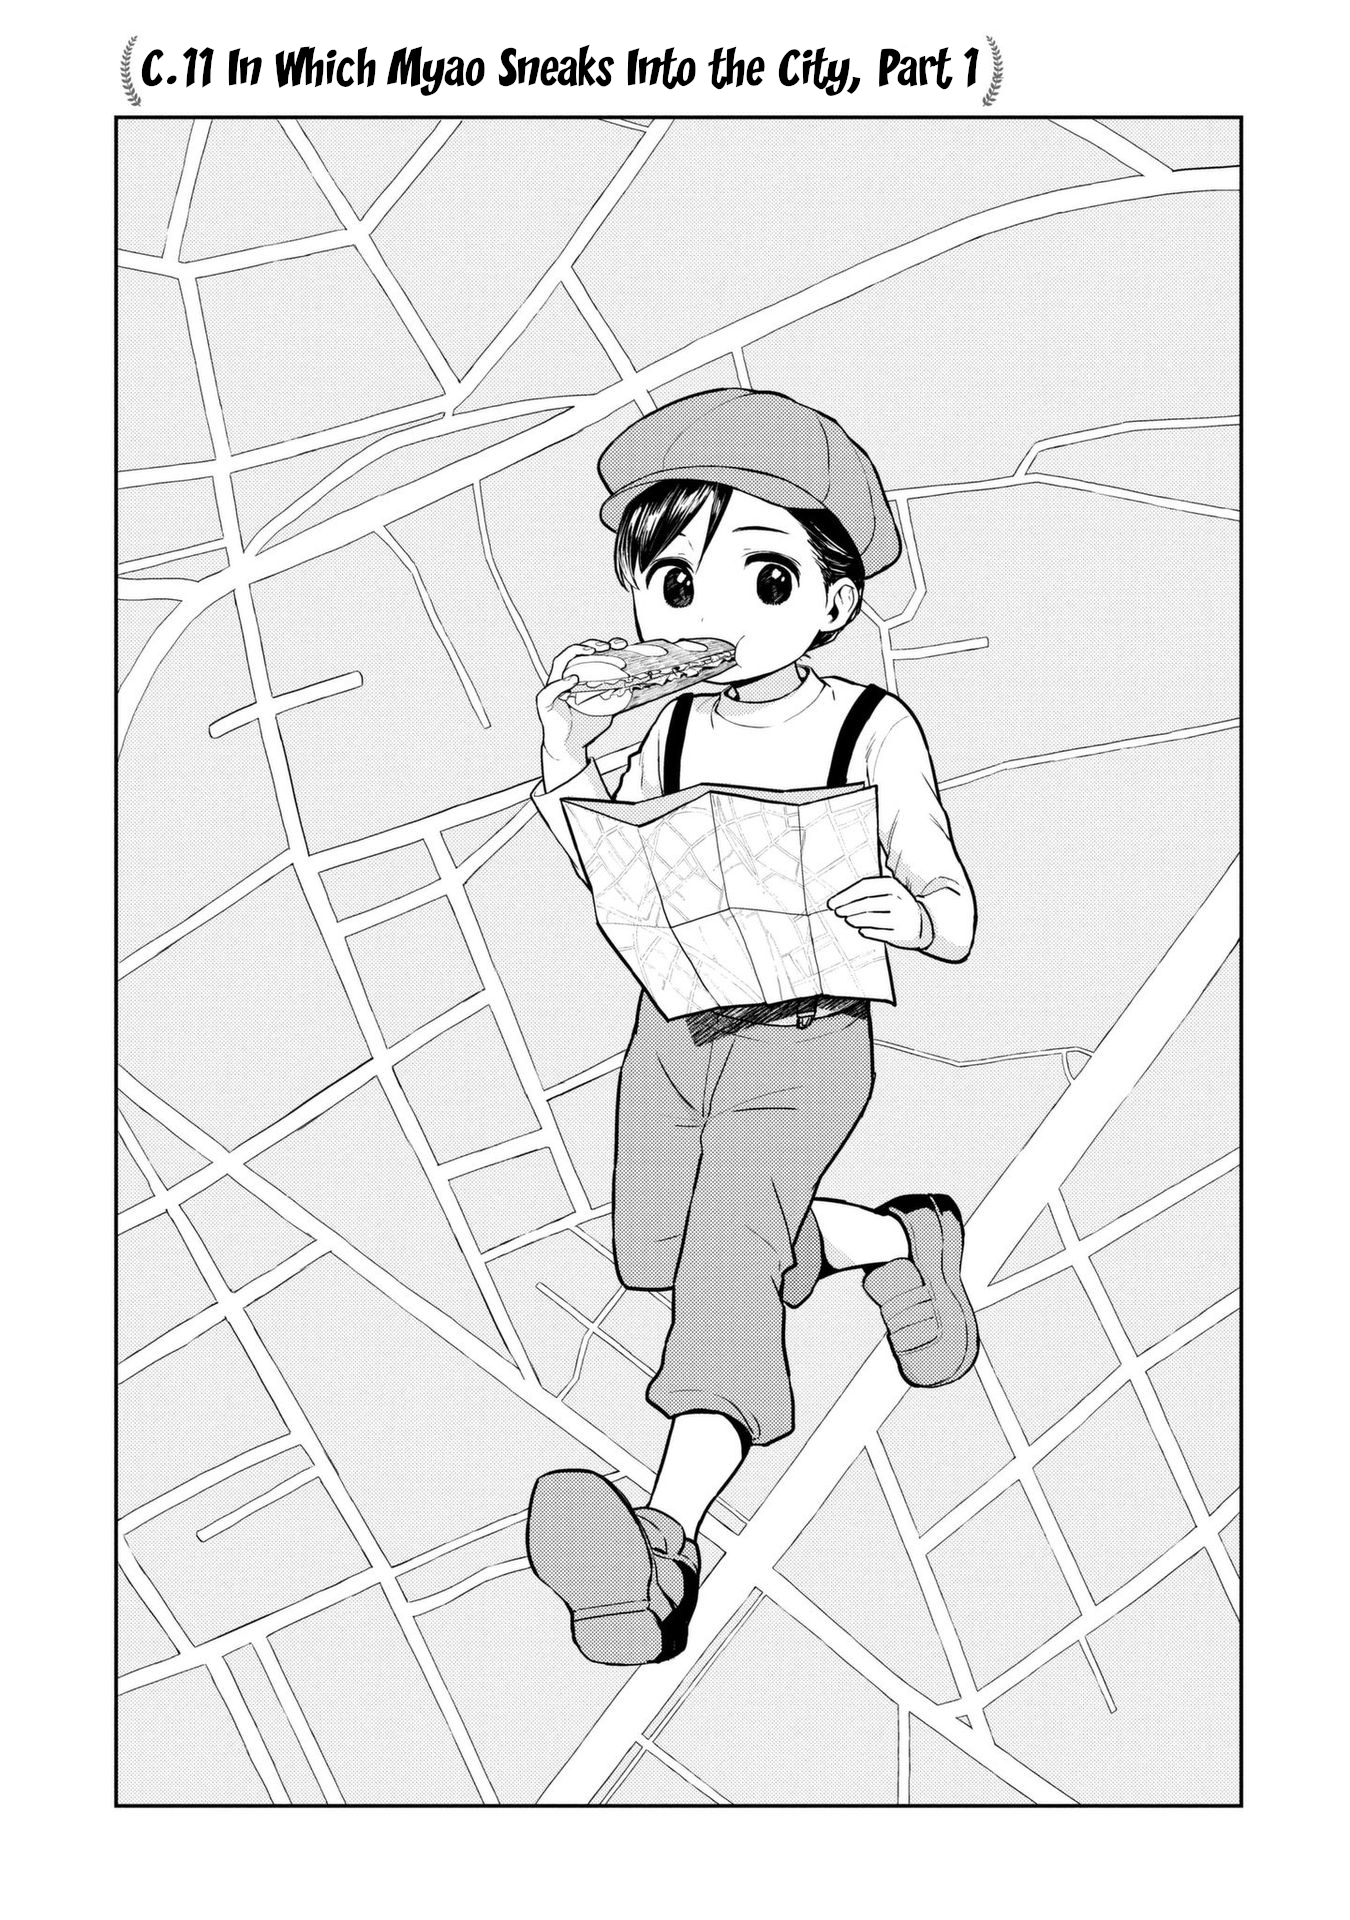 Oh, Our General Myao Vol.1 Chapter 11: In Which Myao Sneaks Into The City, Part 1 - Picture 1